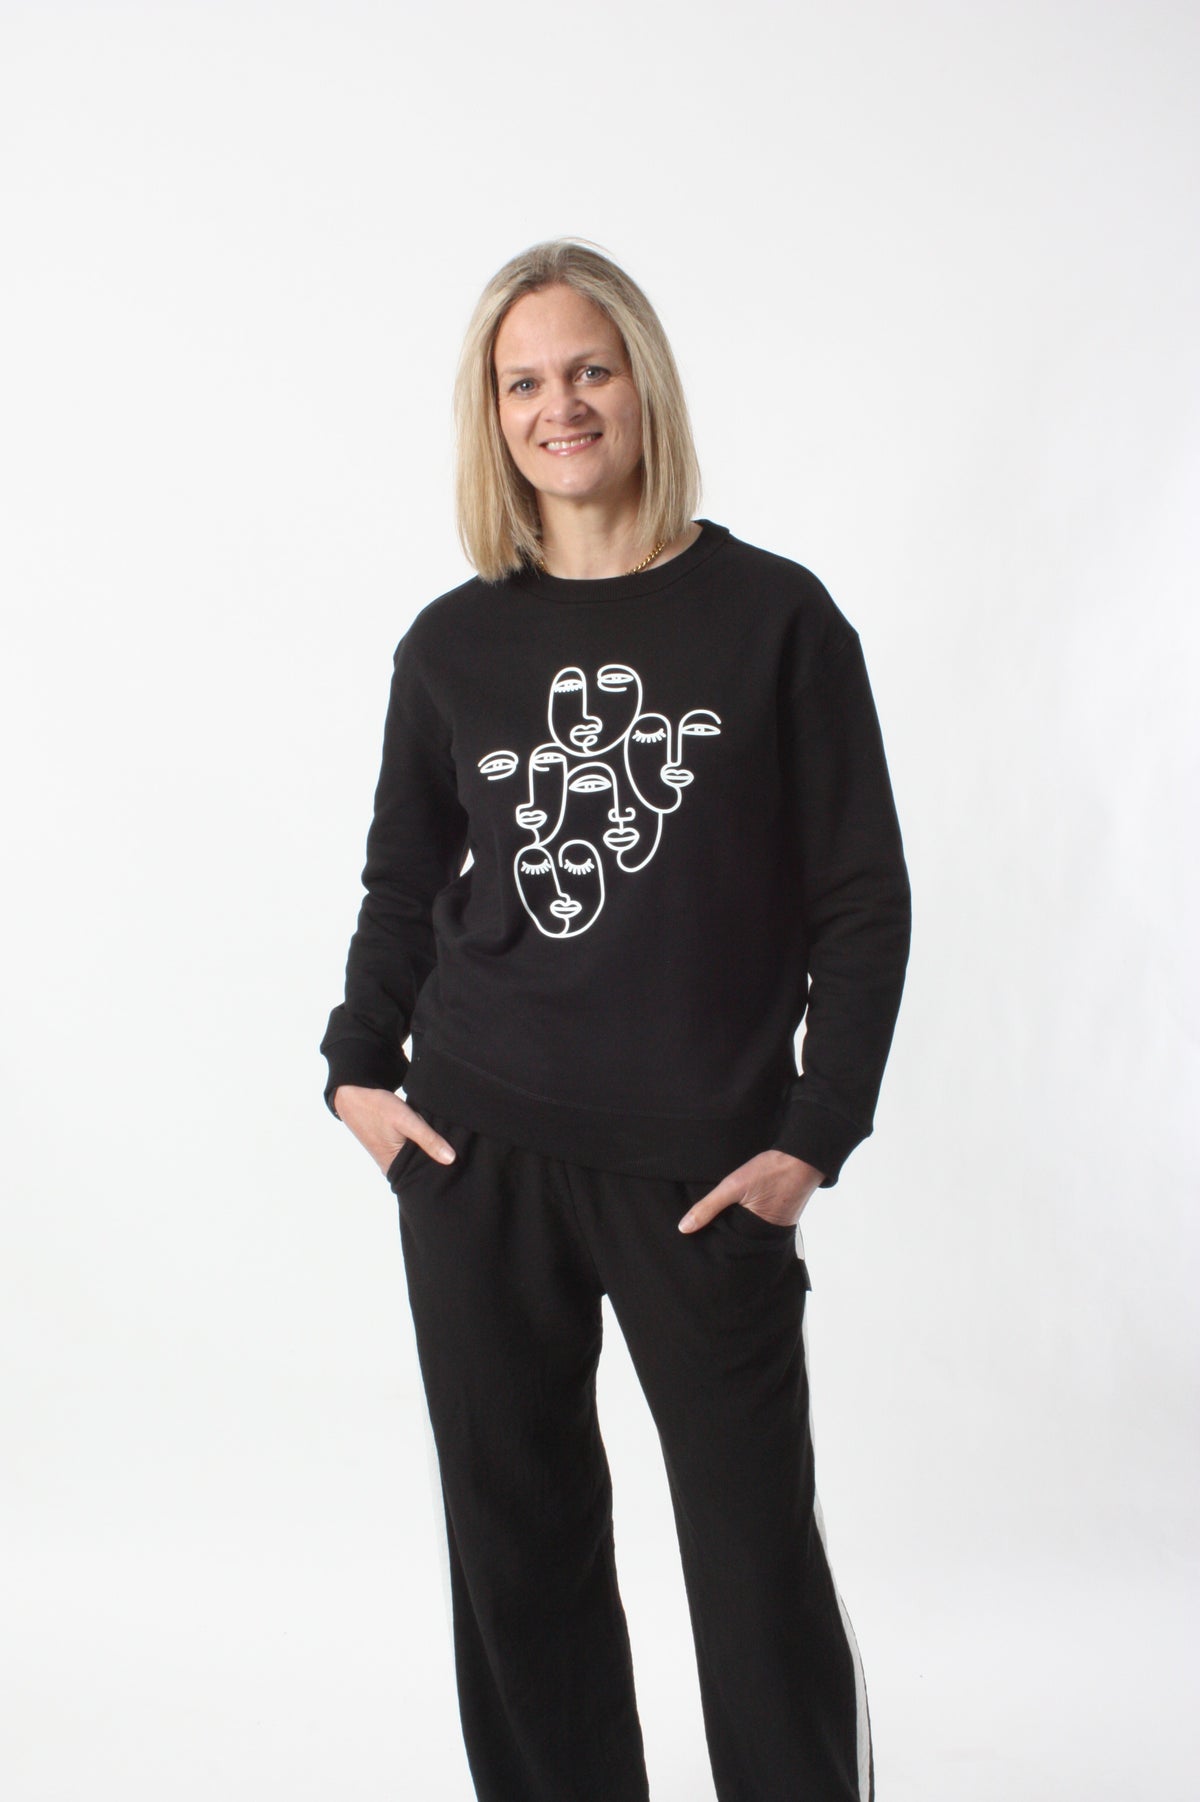 Crew Sweater - Black with white Faces Print - Pre-Order